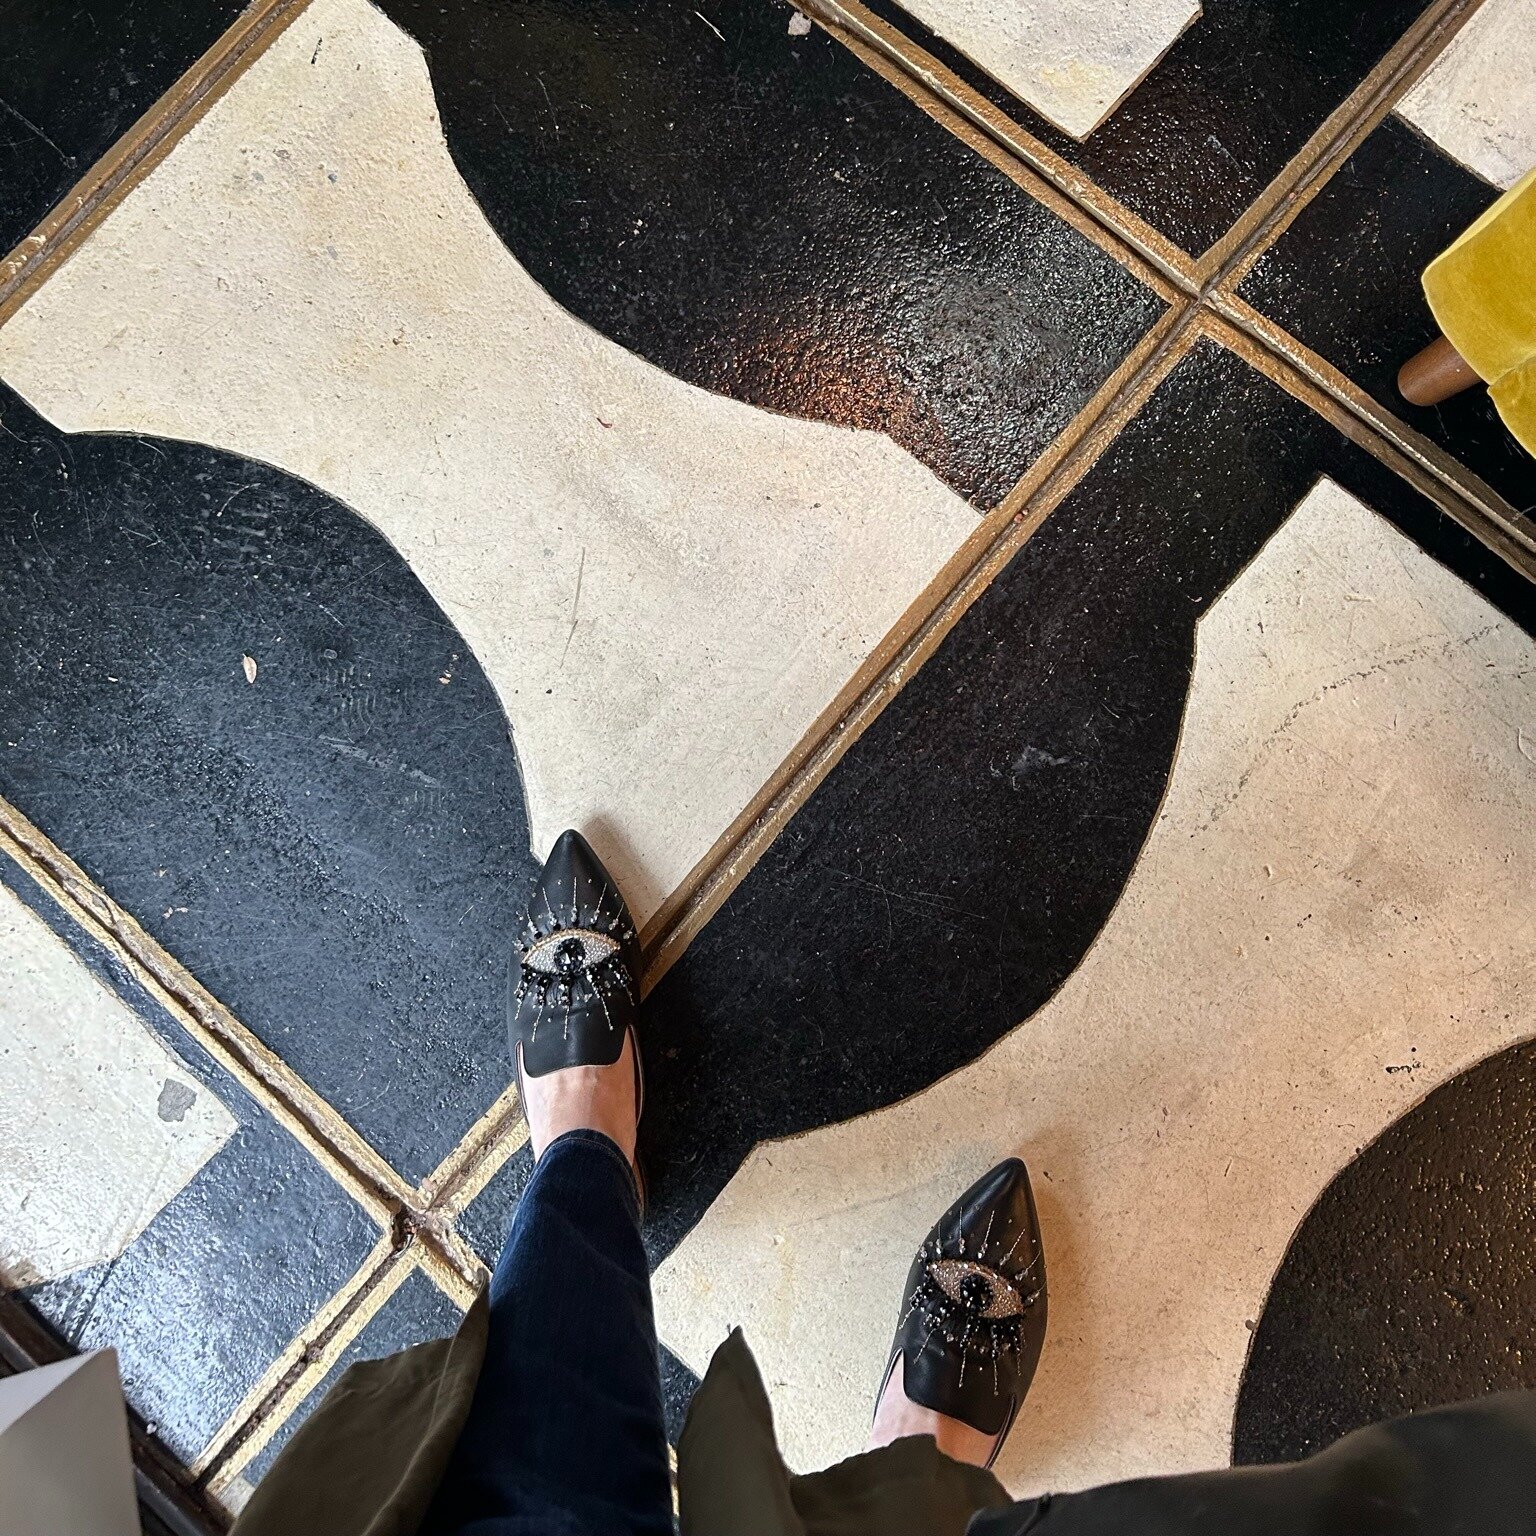 There is something to be said for scaling up. These tiles are fairly simple, but they make a huge impact. #bestfootforward #flooringideas #blackandwhitefloor

#huntleycodesign #triciahuntley #austindesign #shoppinginaustin #designtrip #sourcing #desi